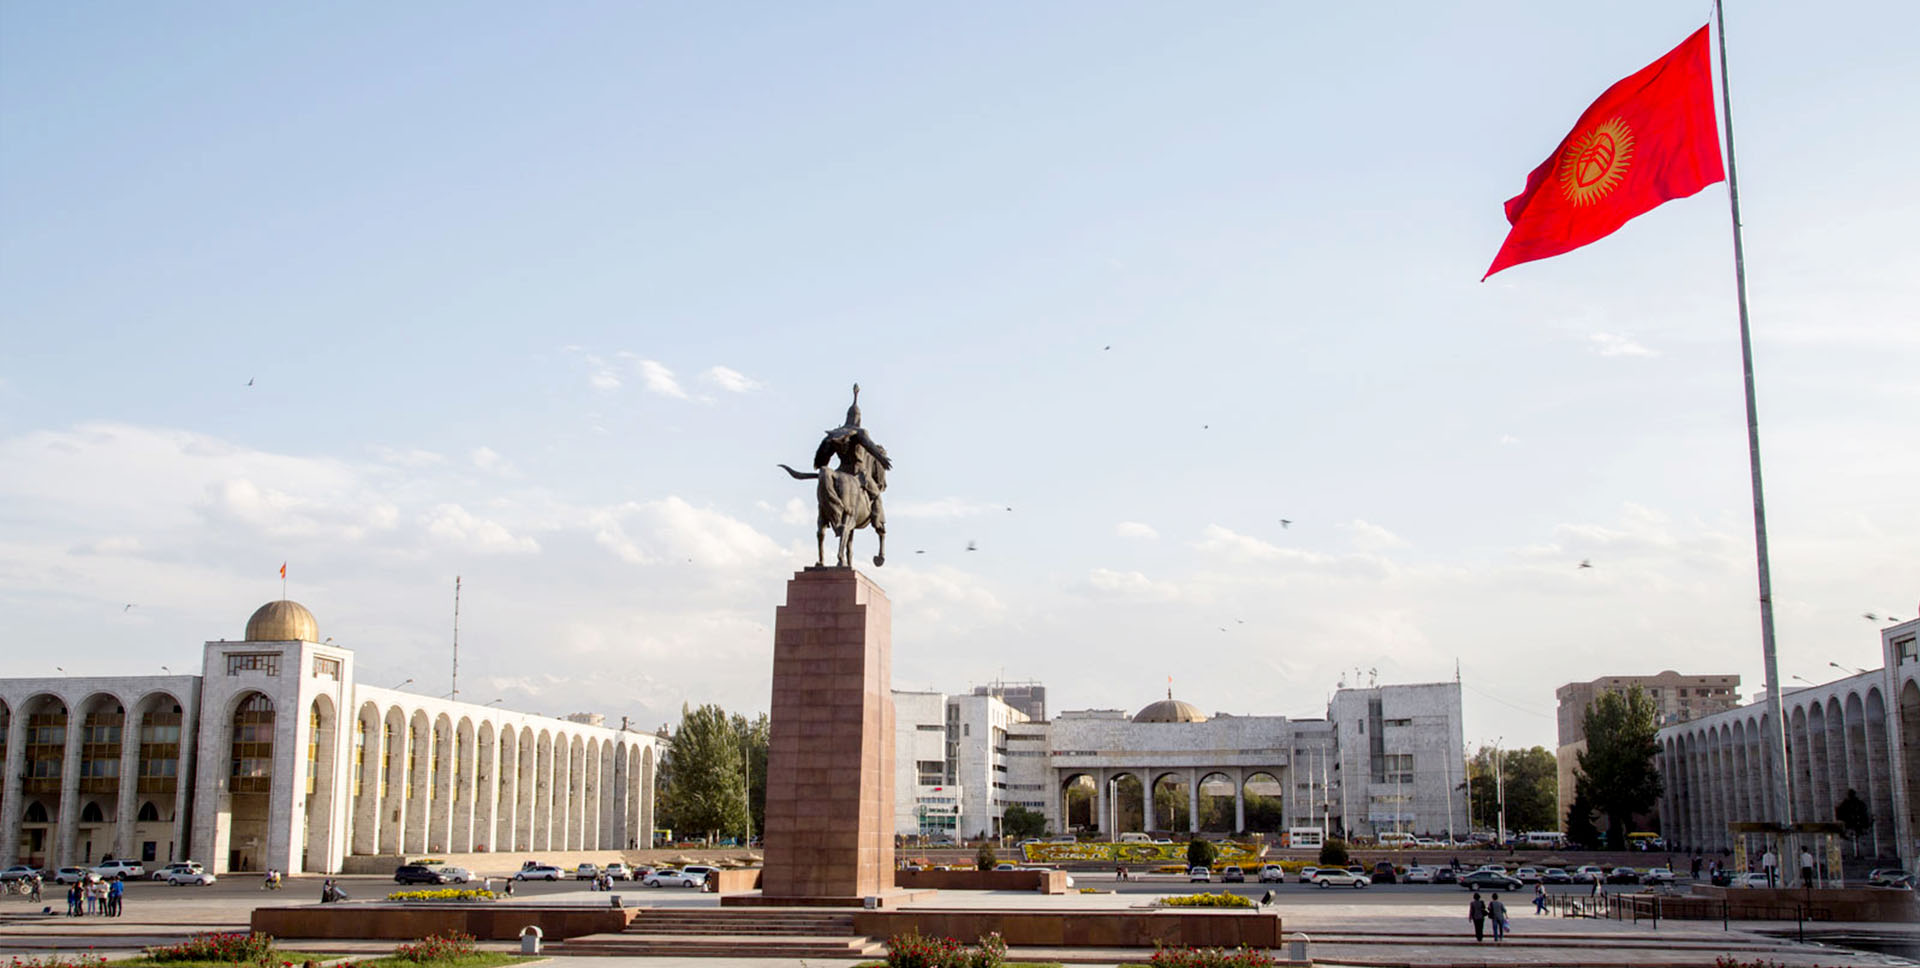 Do you know the sights of Kyrgyzstan?